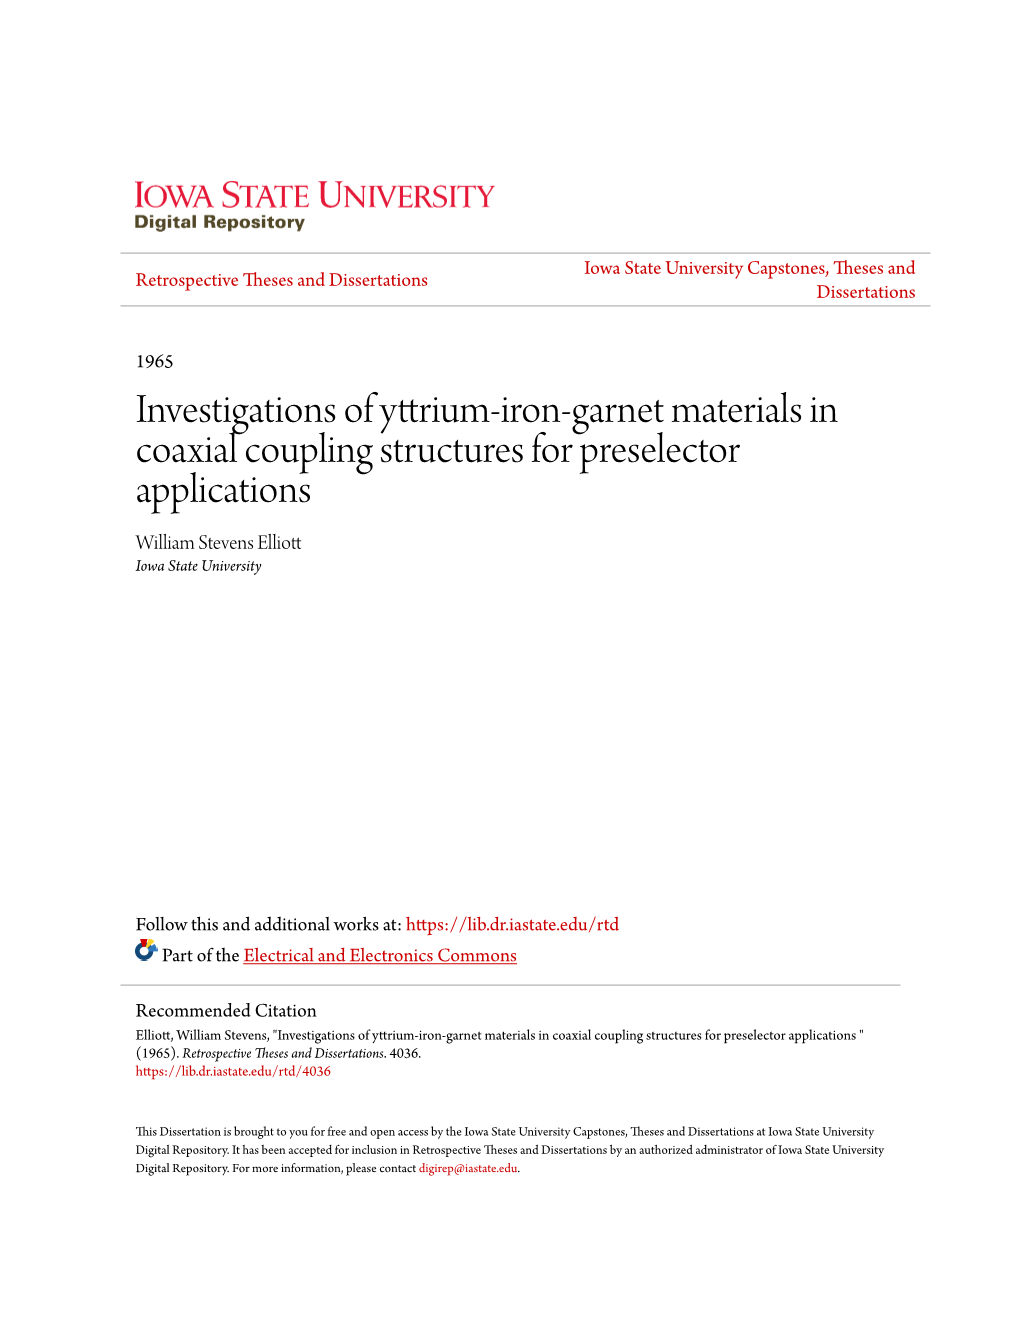 Investigations of Yttrium-Iron-Garnet Materials in Coaxial Coupling Structures for Preselector Applications William Stevens Elliott Iowa State University